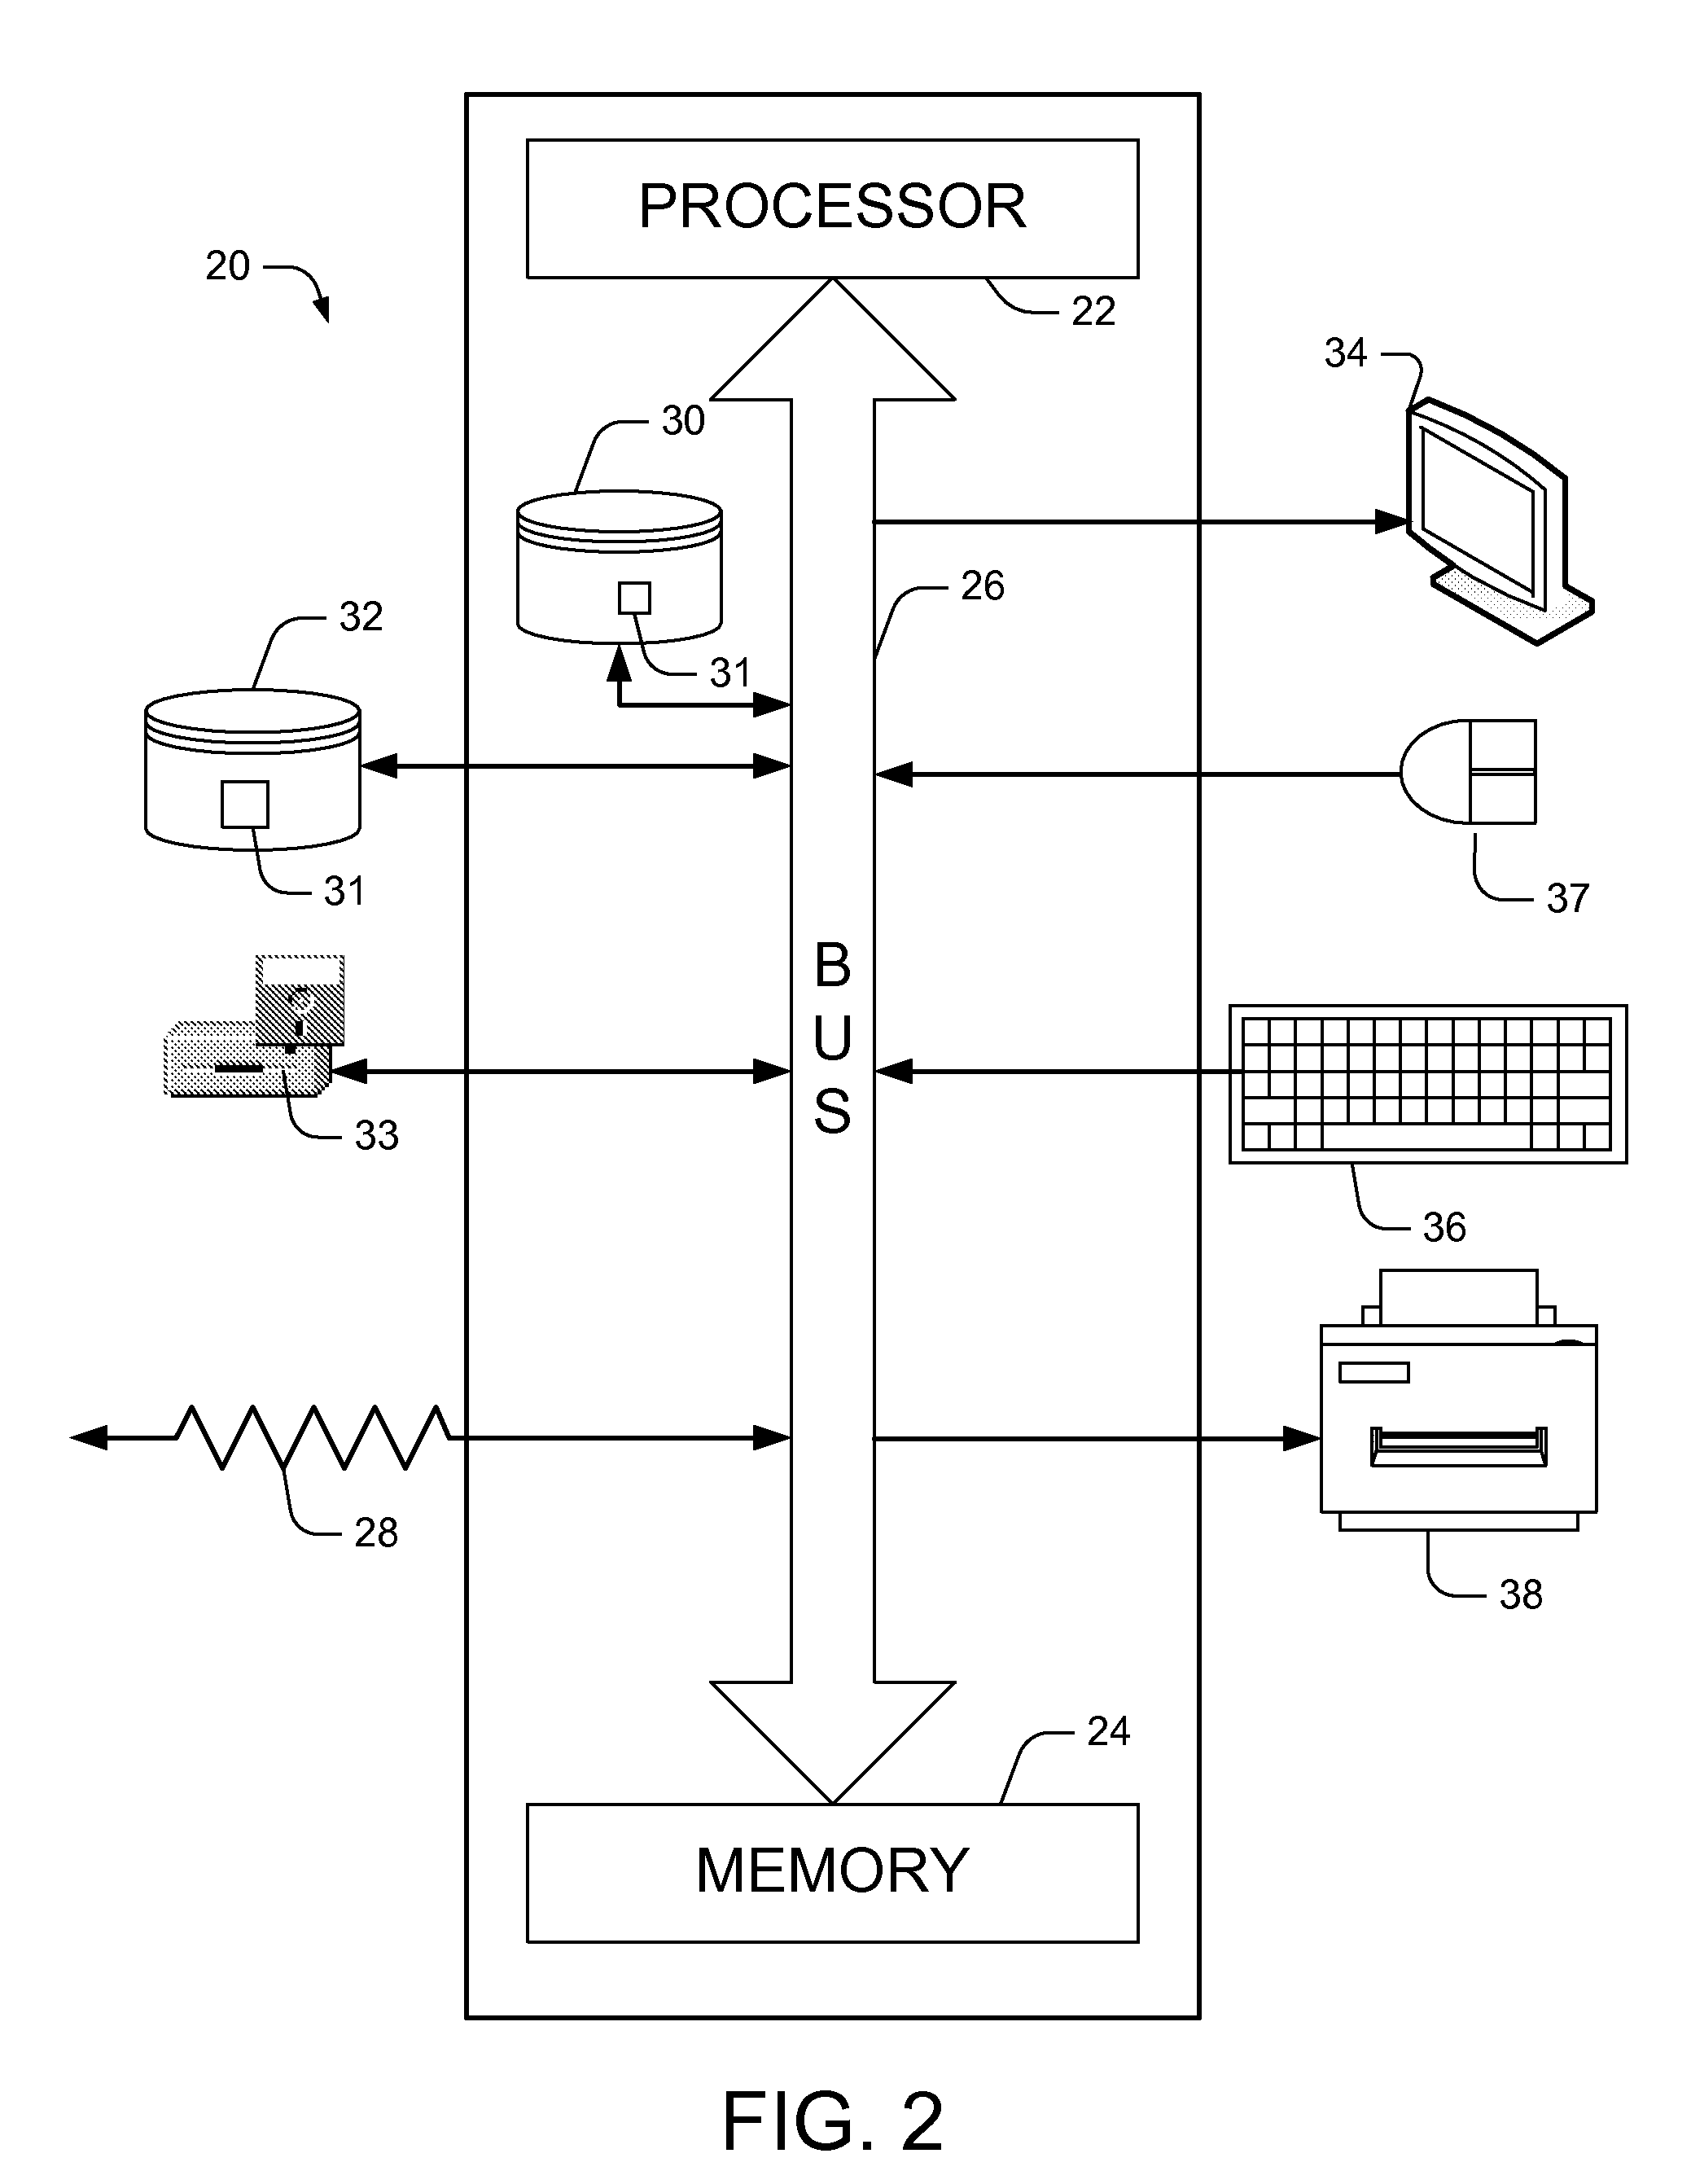 Method and System for Providing Discounted Services to Customers